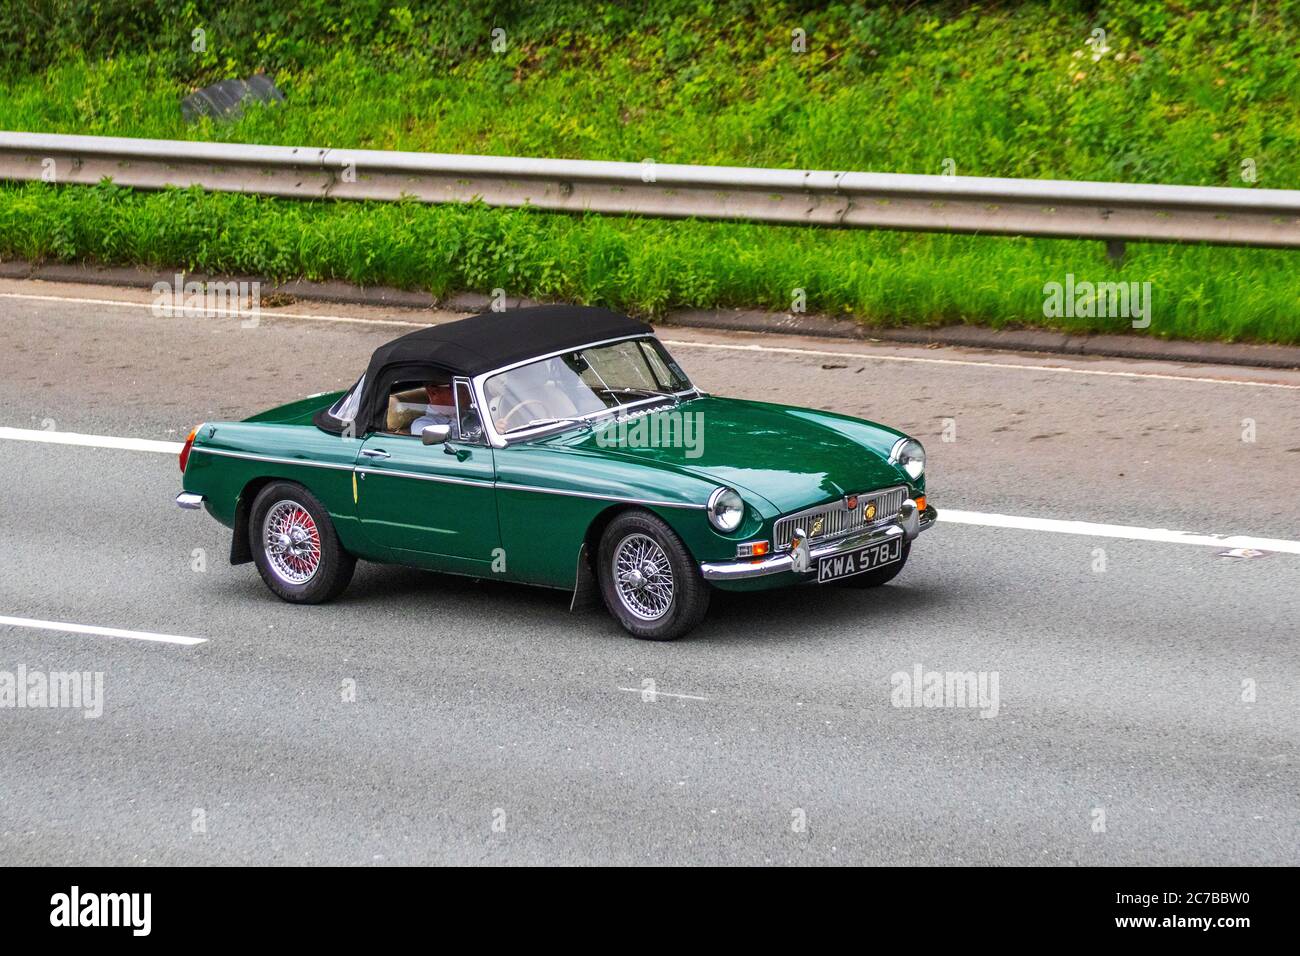 1971 70s seventies Green MG B 1798cc petrol; Vehicular traffic moving vehicles, cars driving vehicle on UK roads, 70s motors, sports cars motoring on the M6 motorway highway network. Stock Photo